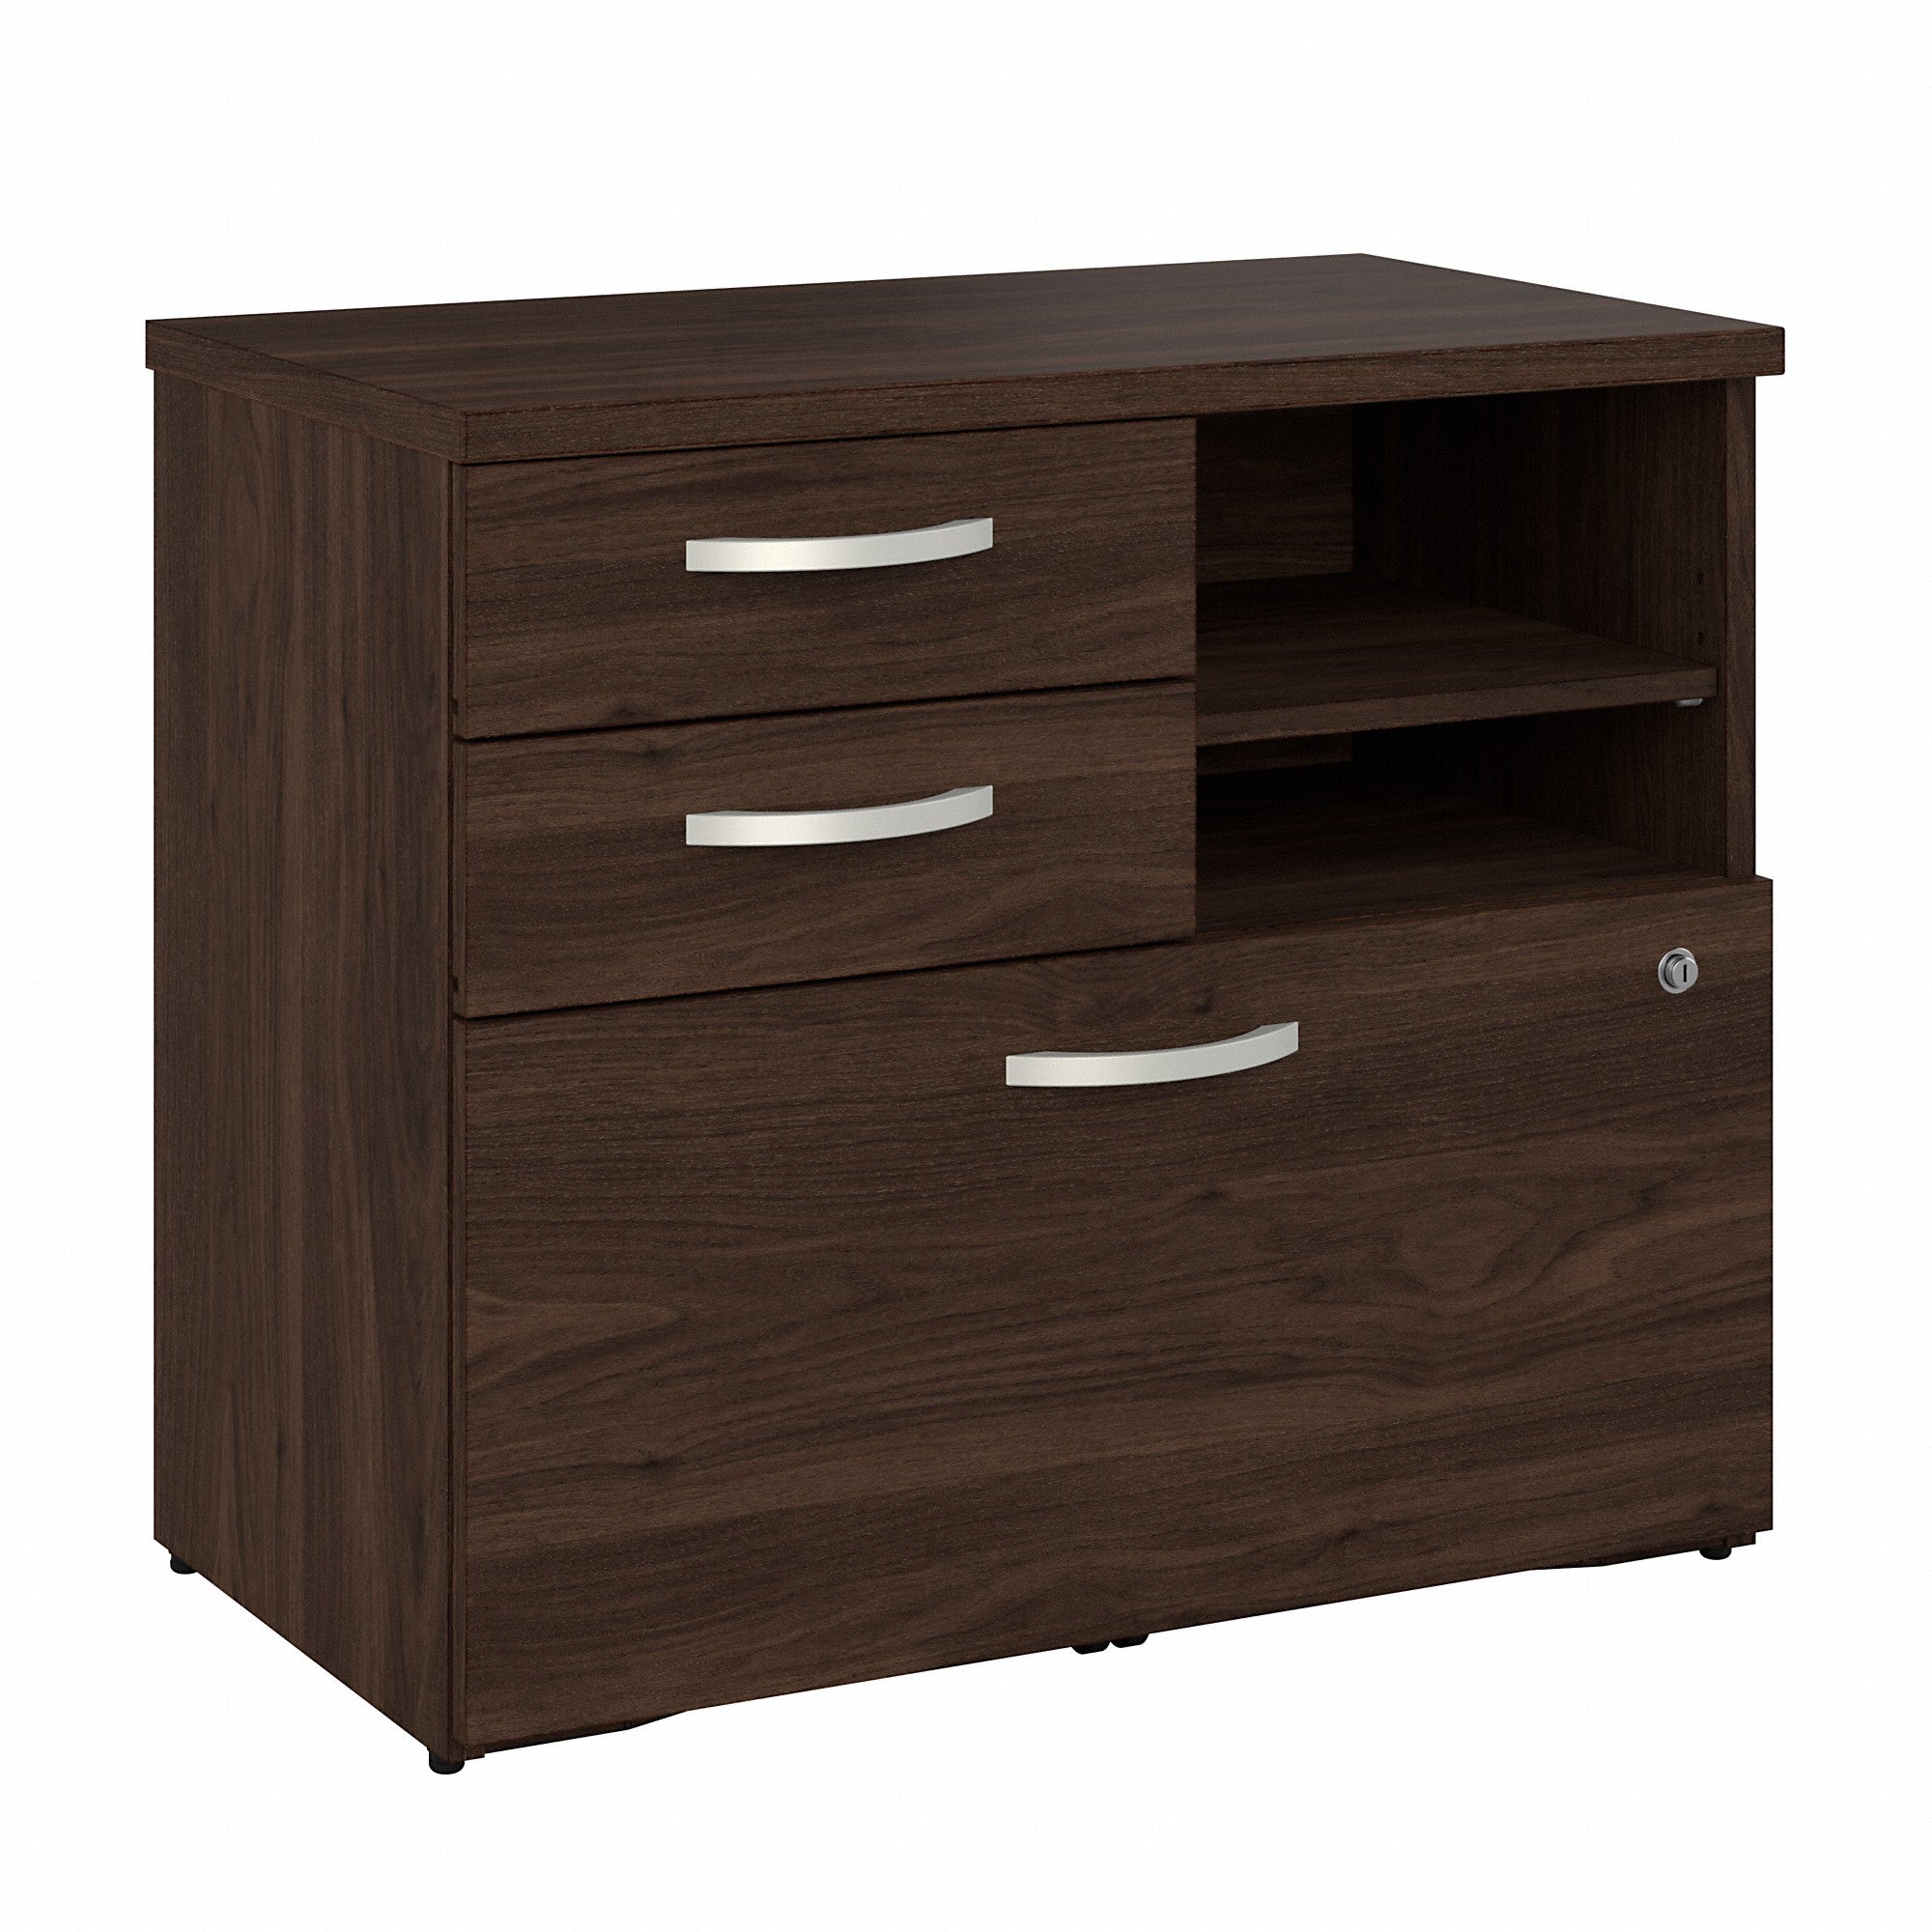 Bush Business Furniture Hybrid Office Storage Cabinet with Drawers and Shelves | Black Walnut